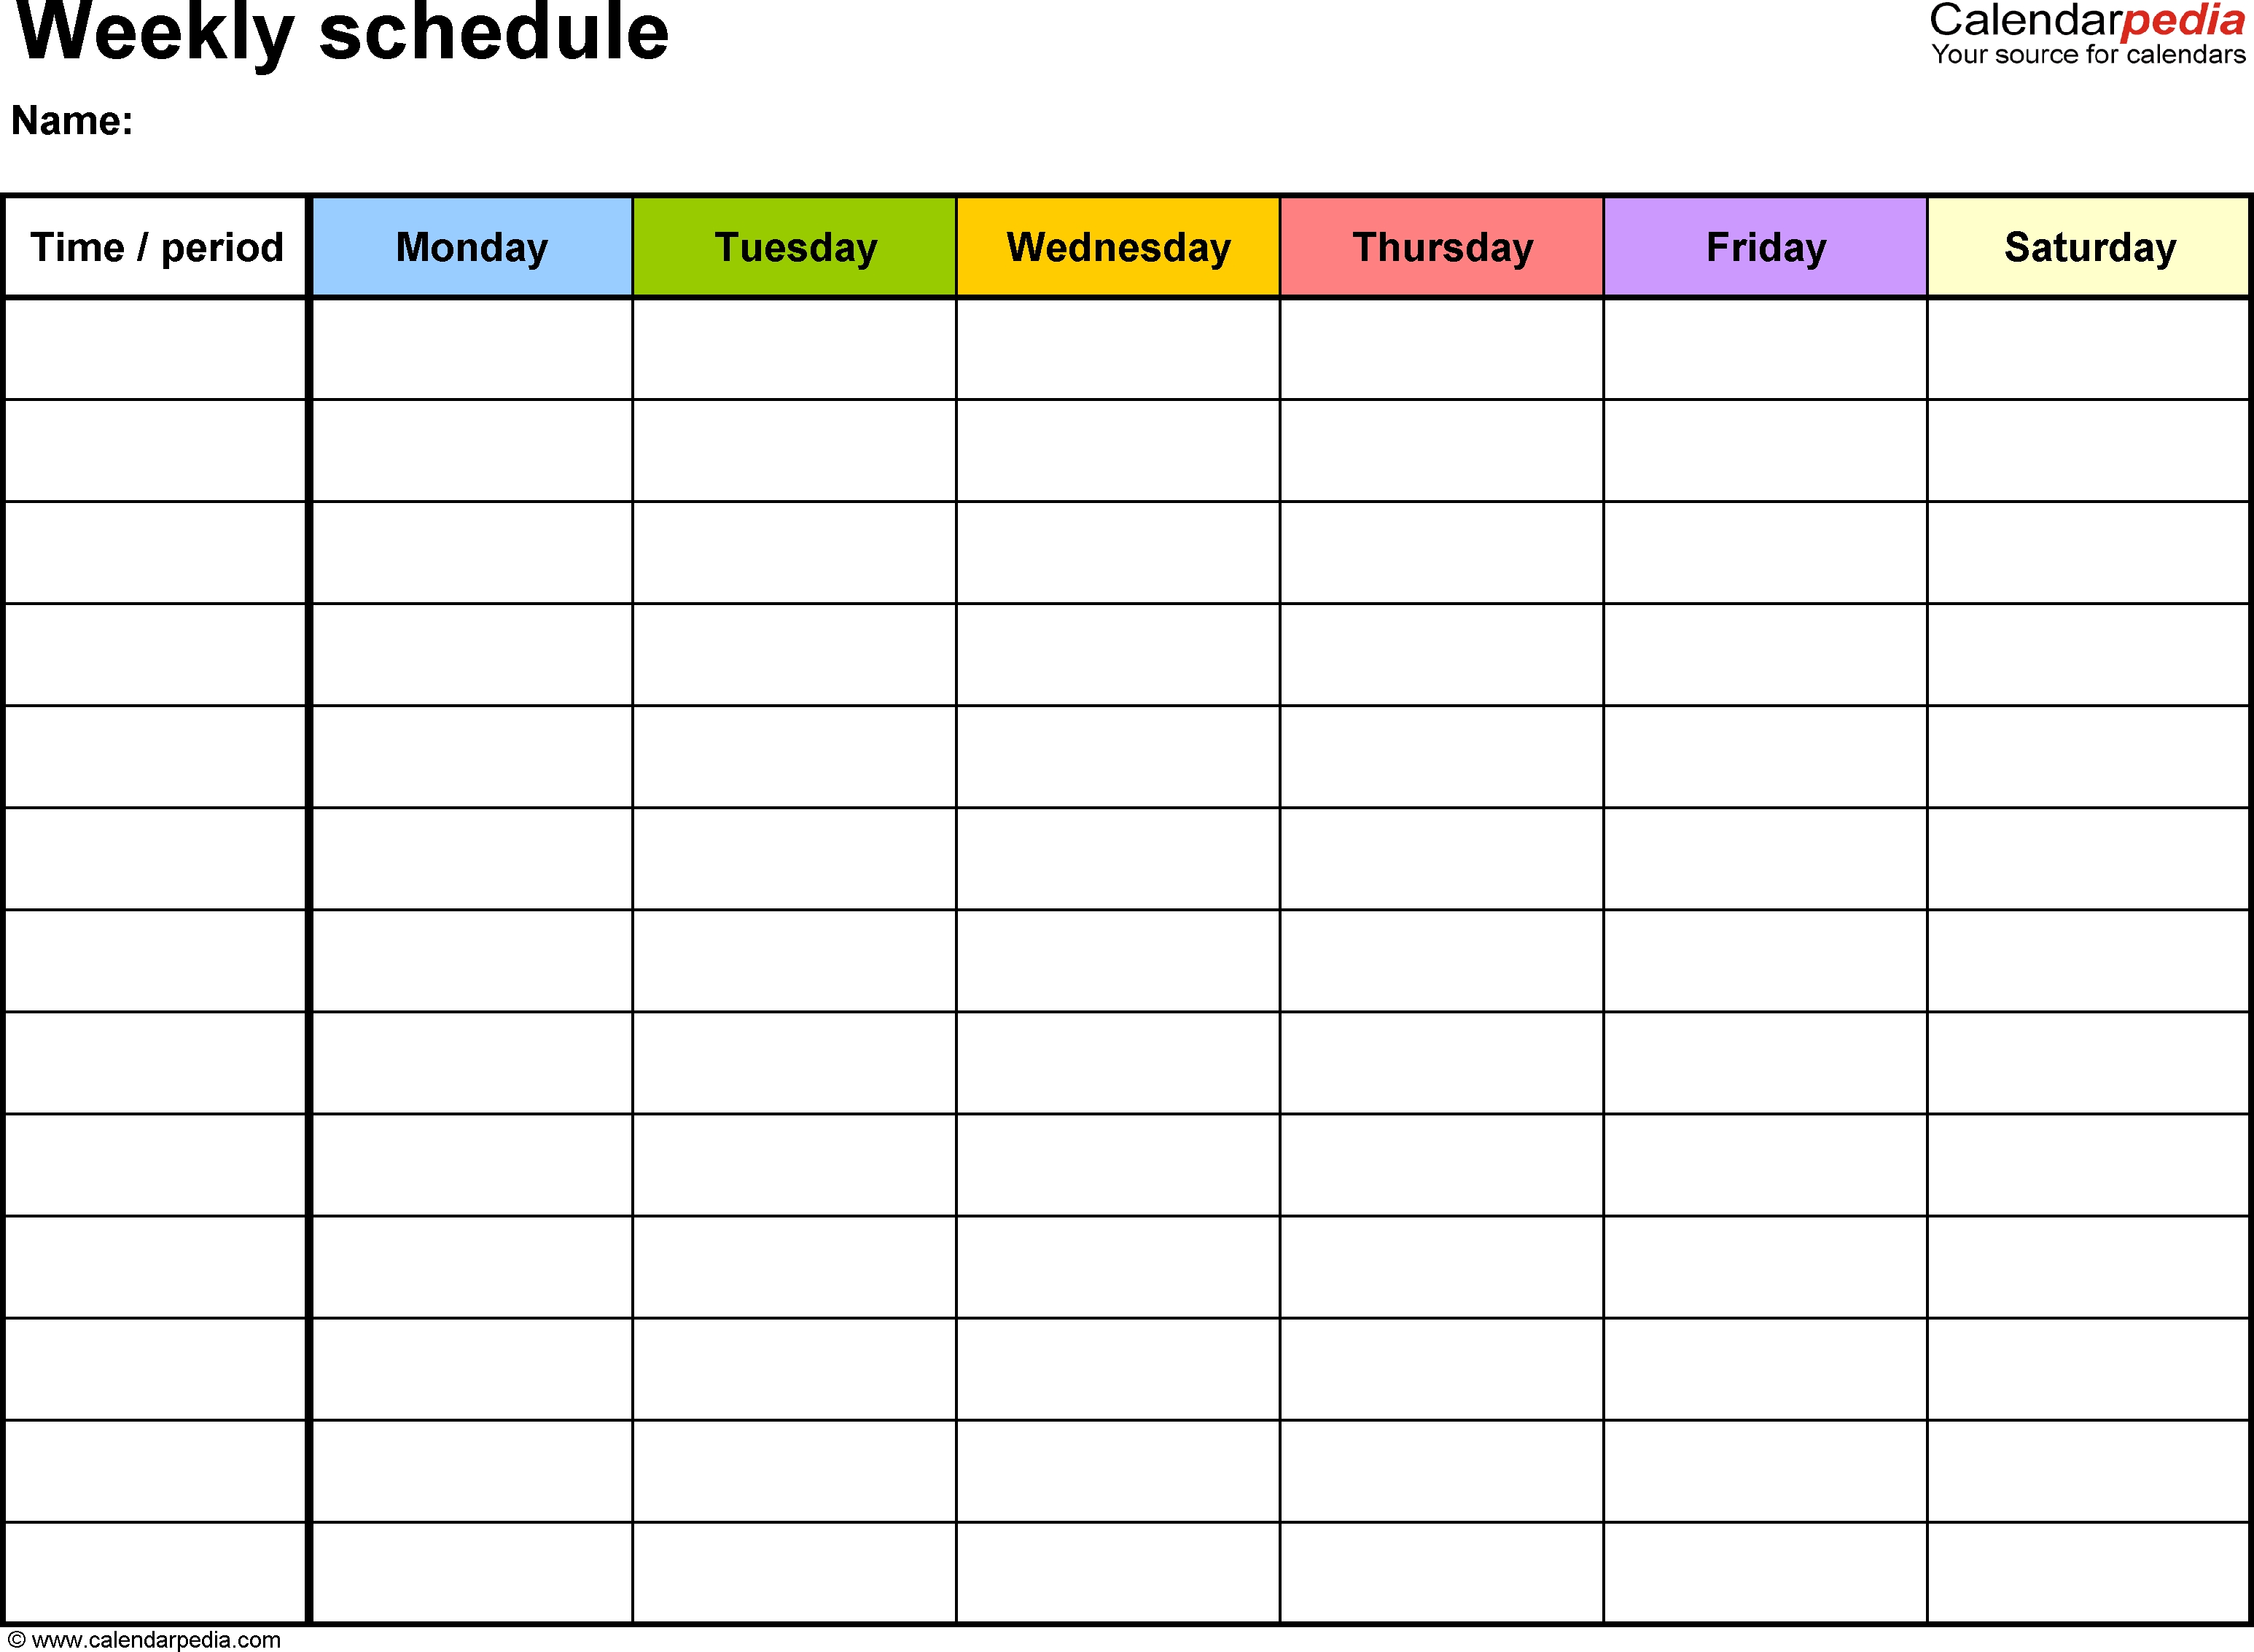 Free Weekly Schedule Templates For Word - 18 Templates with Blank Weekly Calendar Template Free